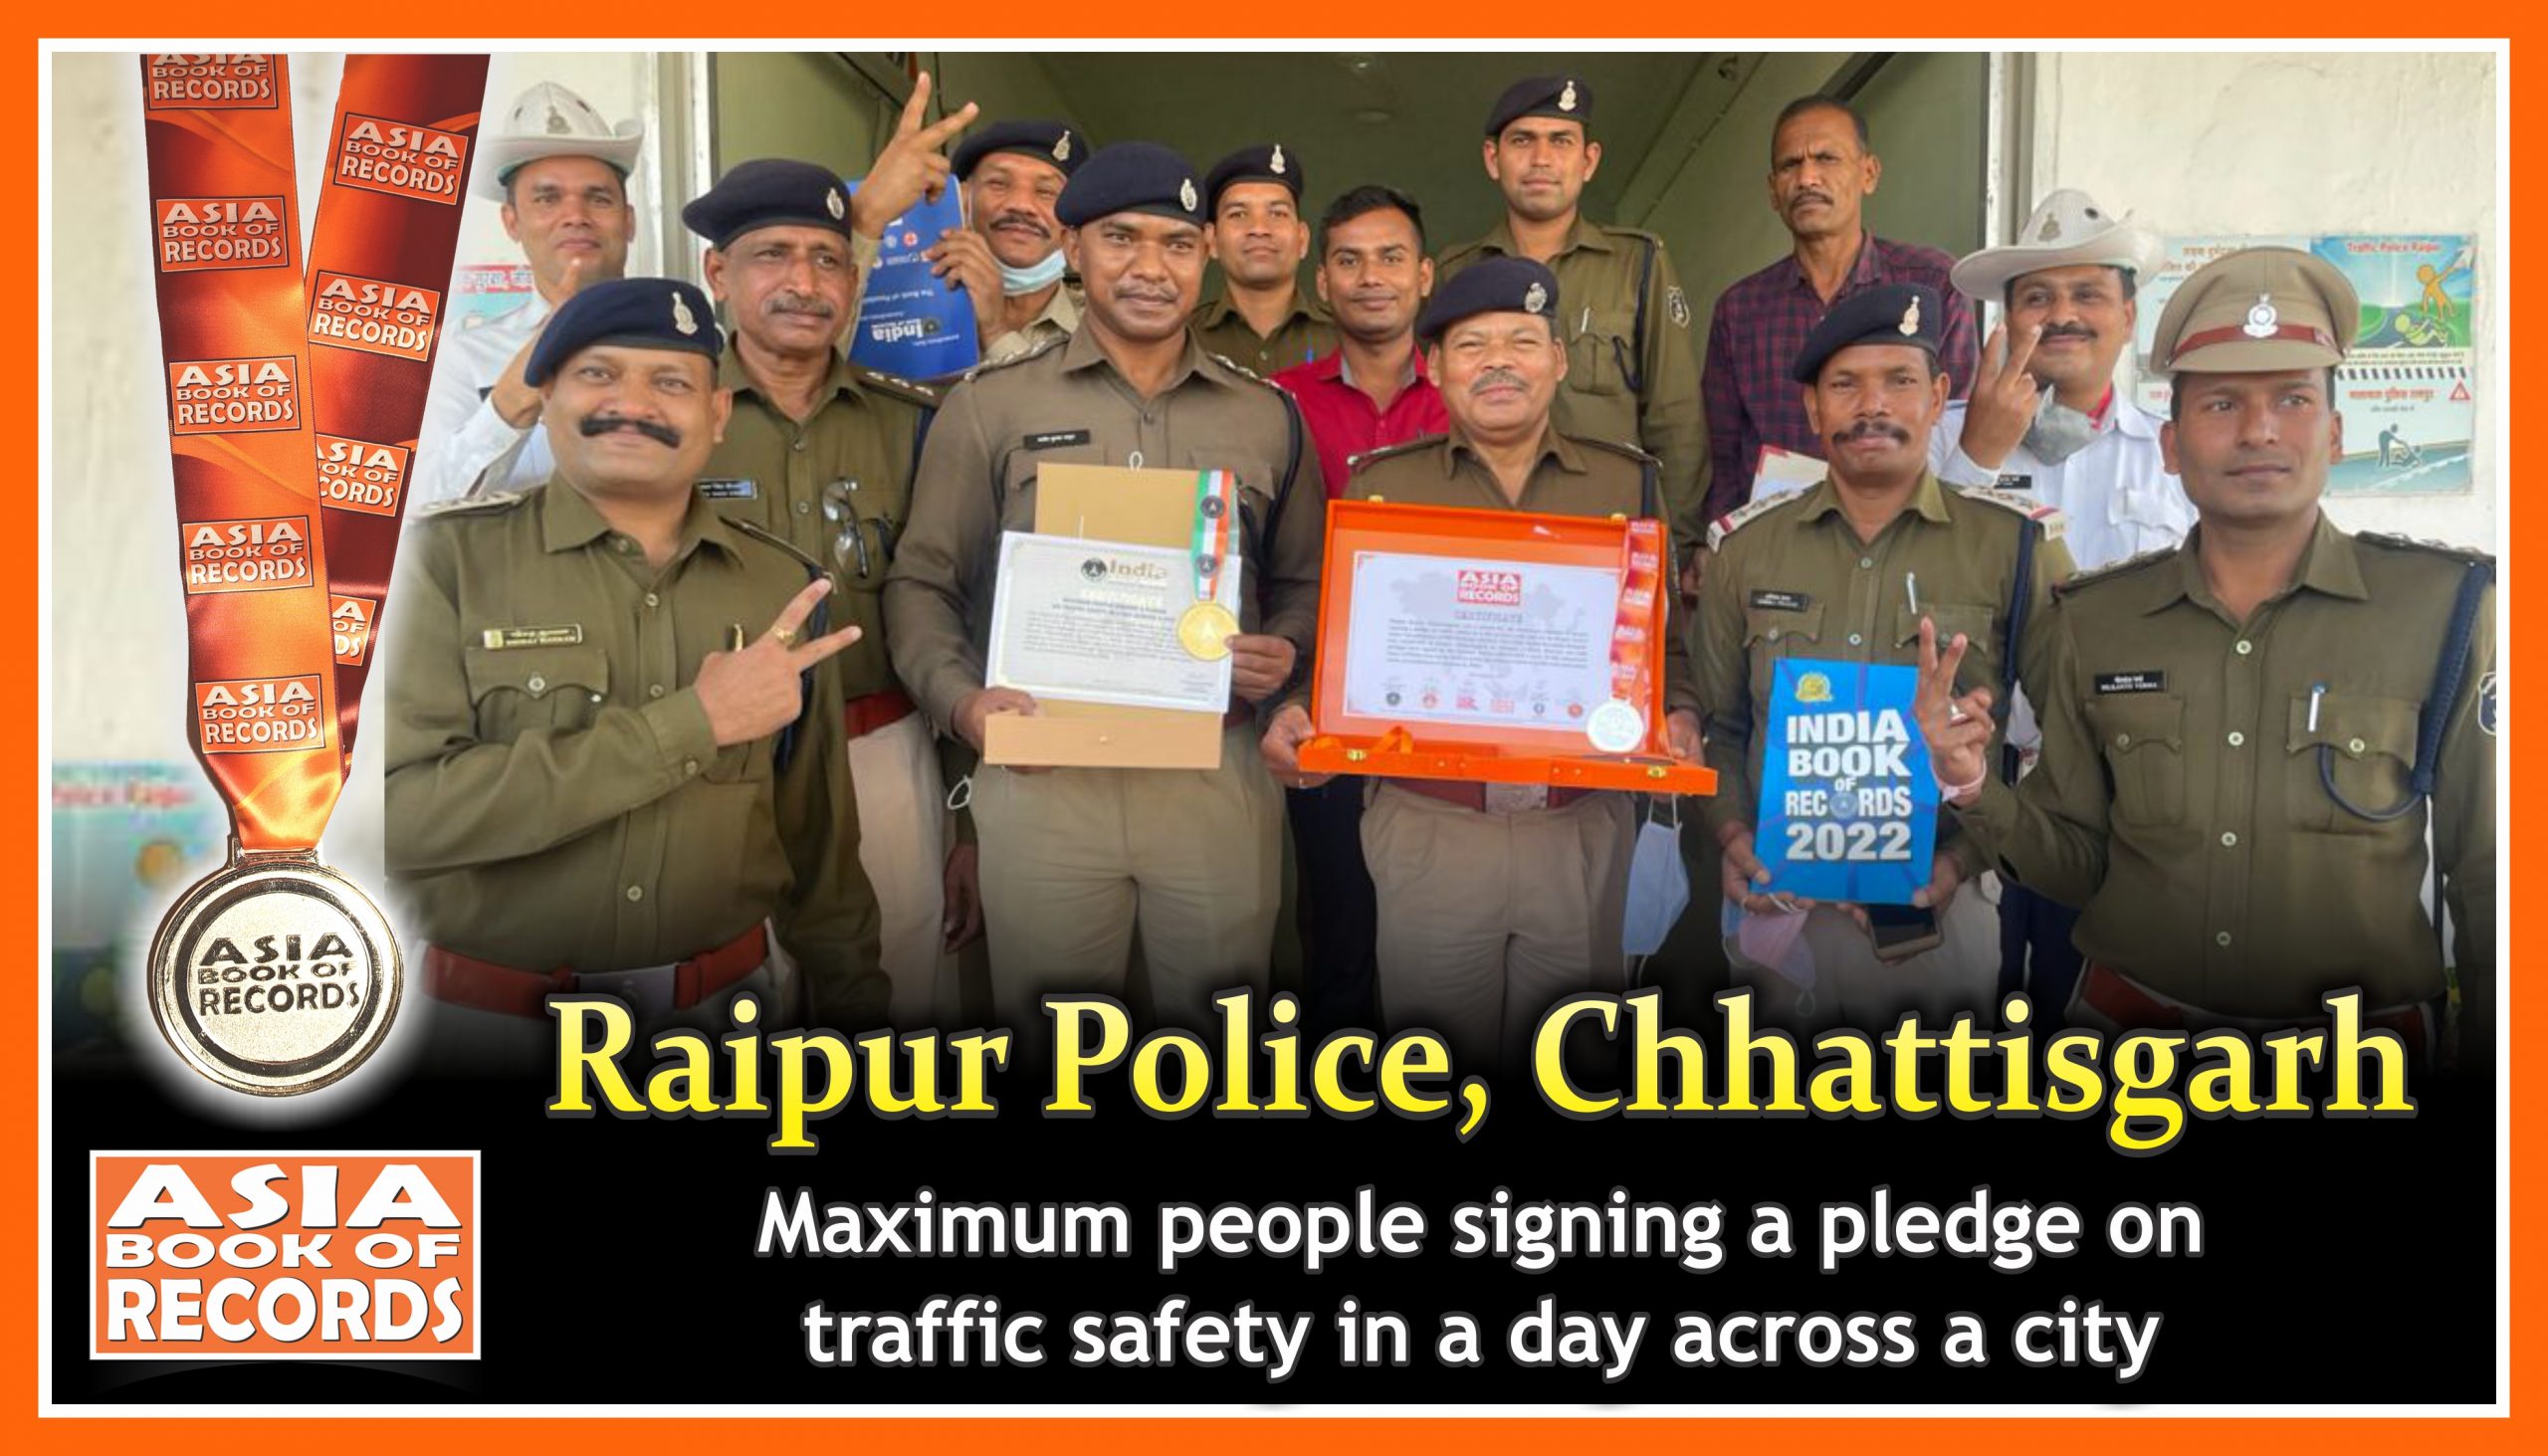 Maximum people signing a pledge on traffic safety in a day across a city